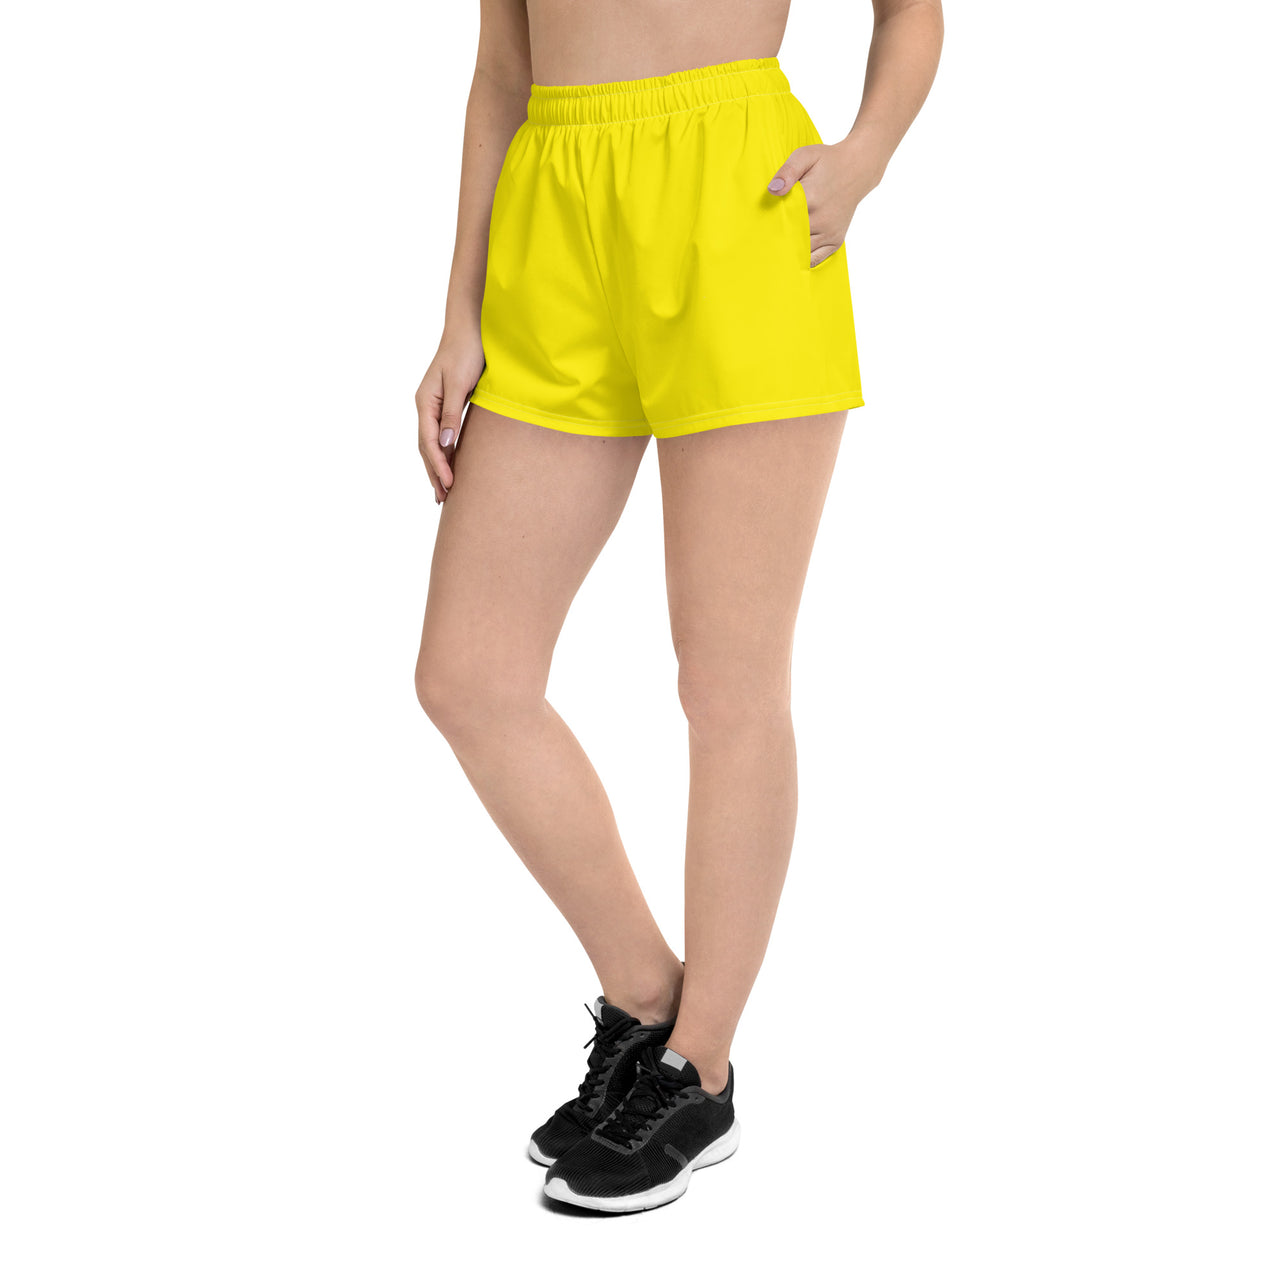 Women’s Recycled Solid Athletic Shorts - Yellow SHAVA CO